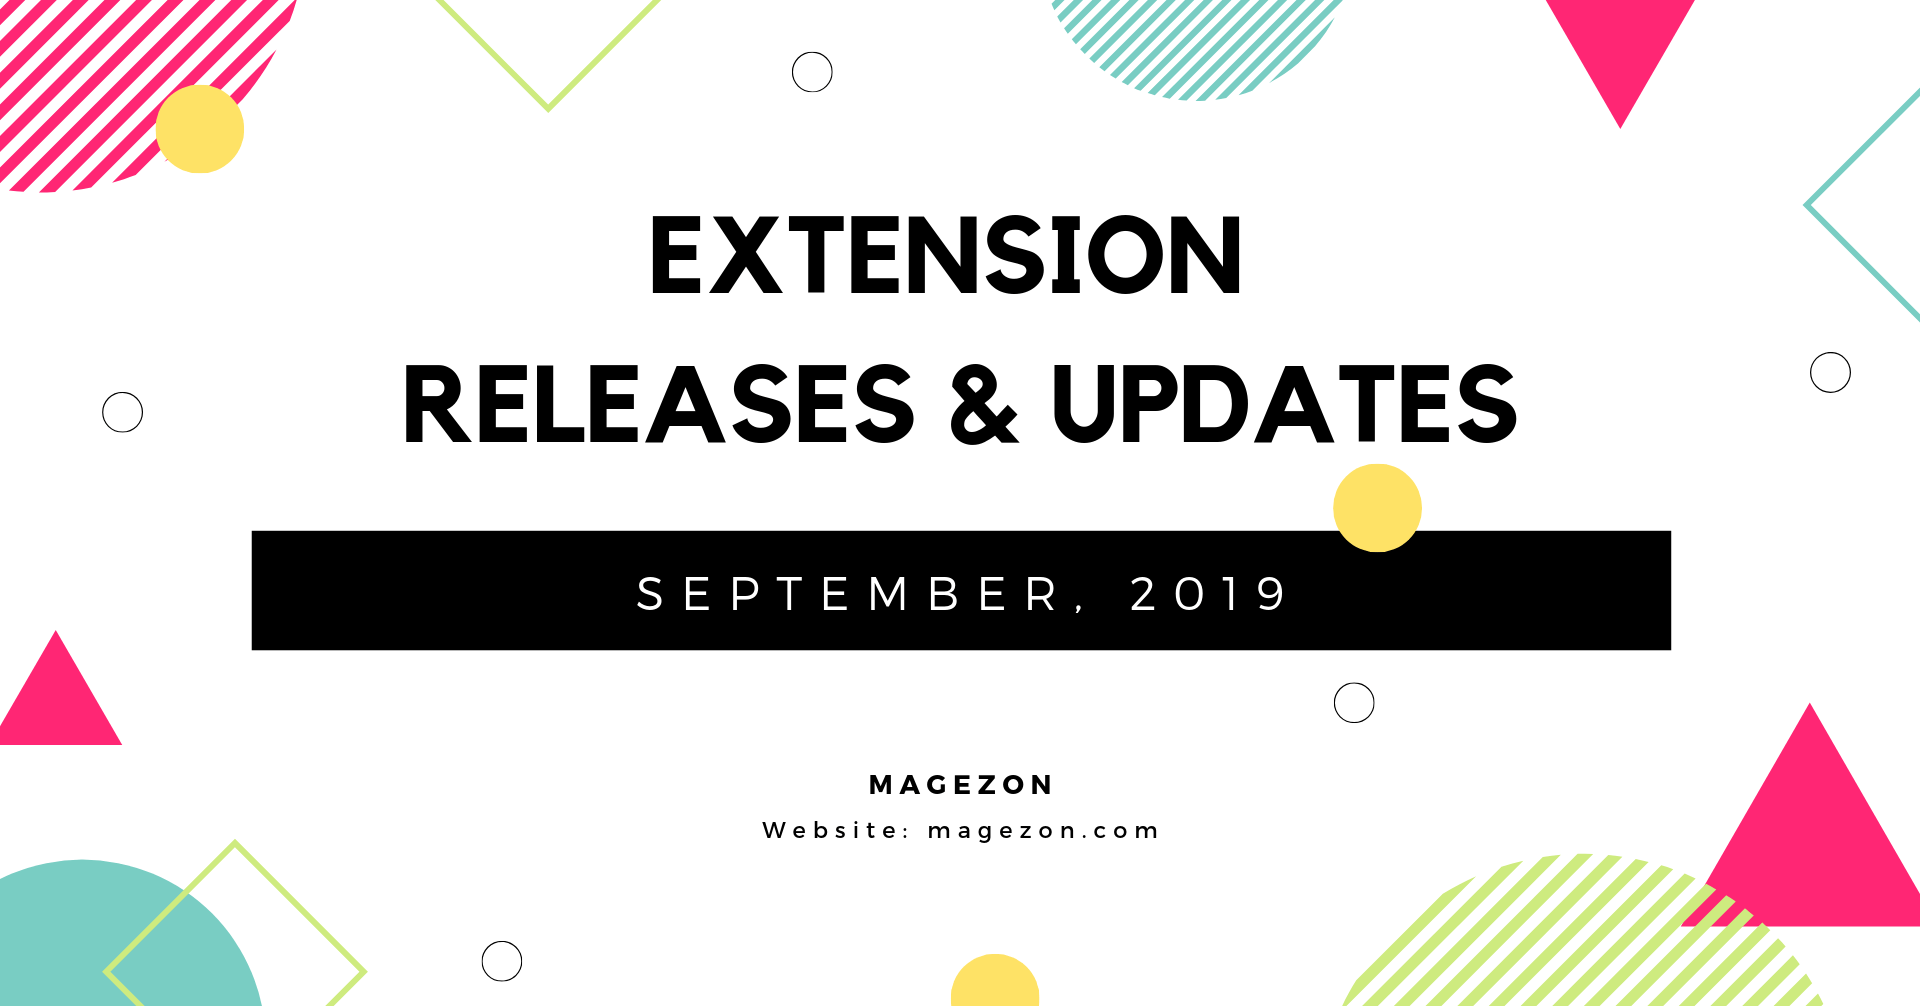 September 2019: Magezon Extension Releases and Updates